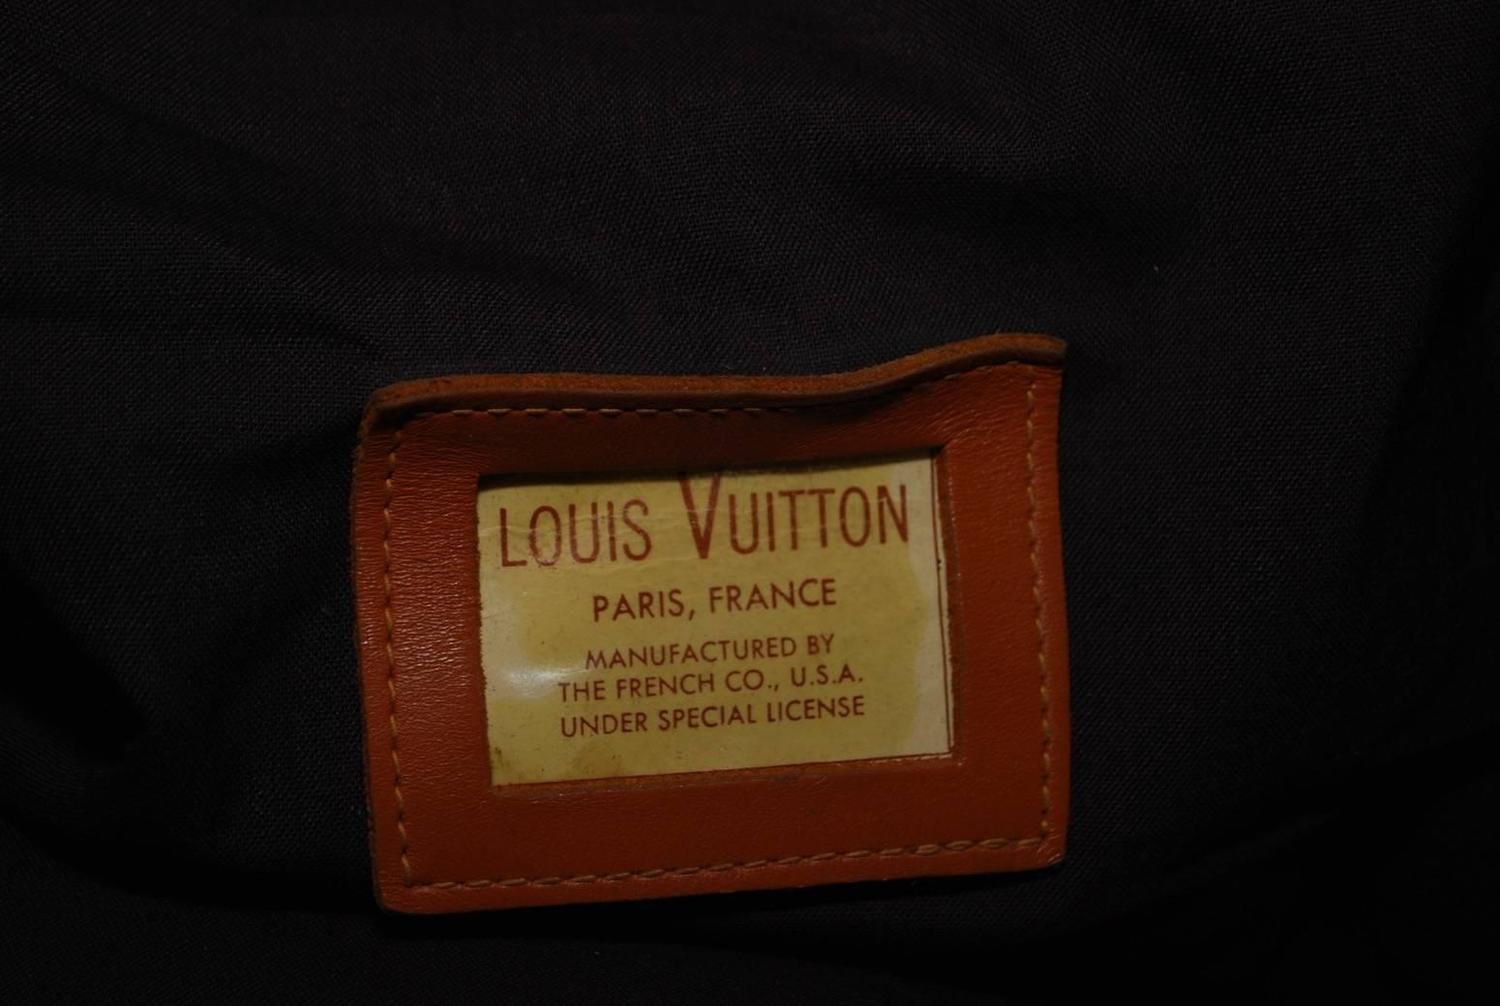 1960s Louis Vuitton Monogram Travel Bag Special Made for Saks Fifth Avenue For Sale at 1stdibs